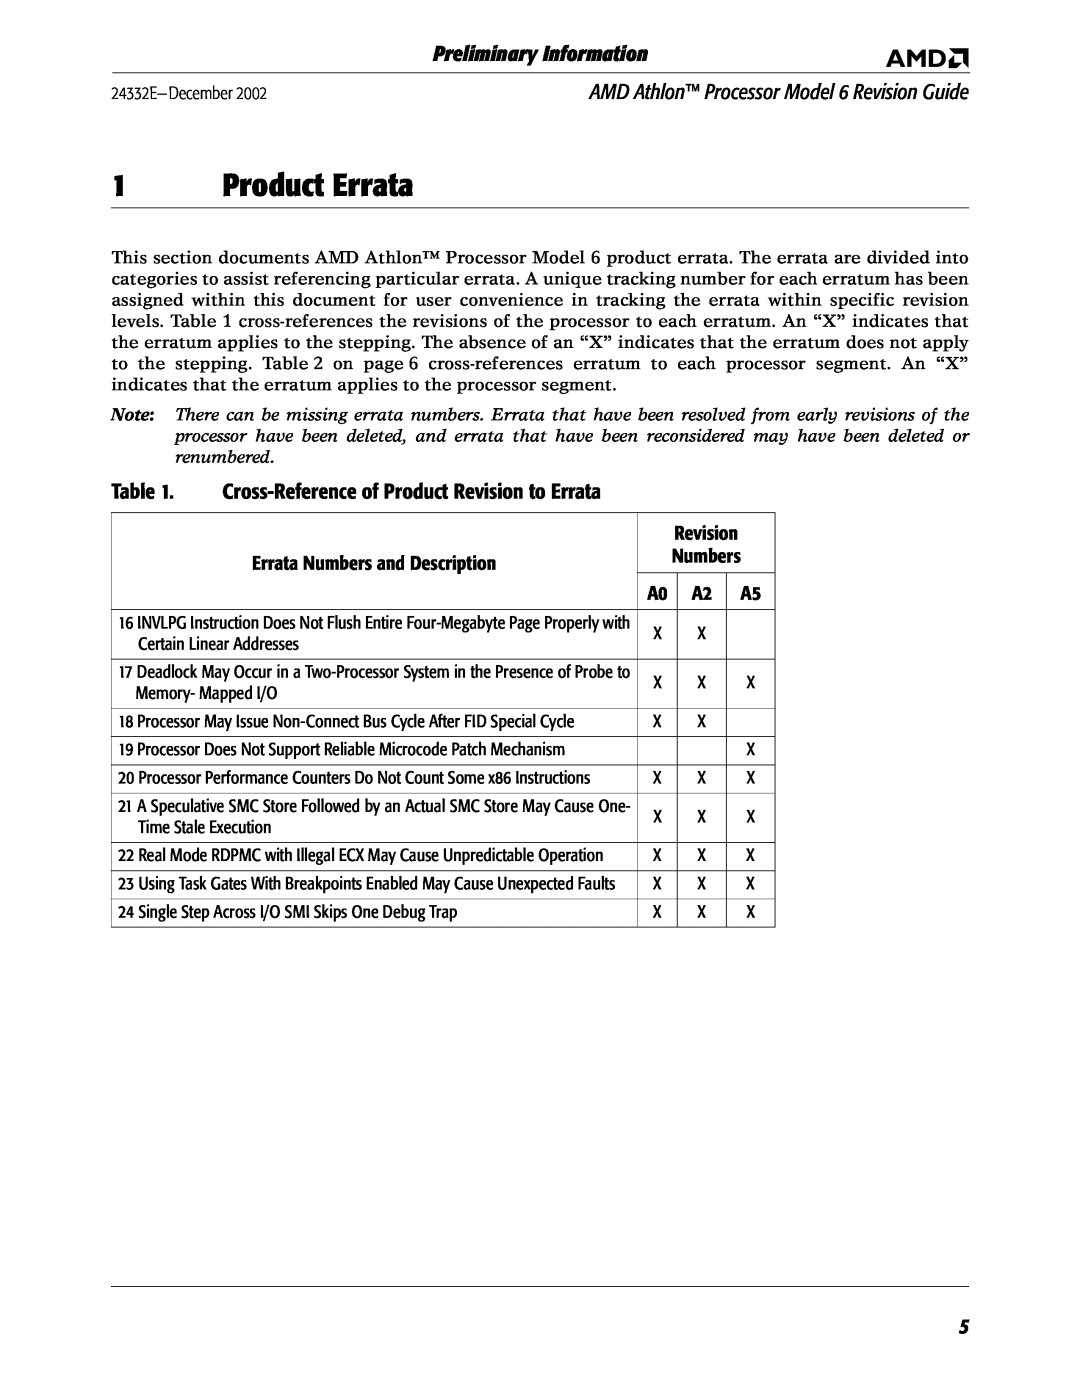 AMD 6 manual Product Errata, Preliminary Information, Cross-Reference of Product Revision to Errata 